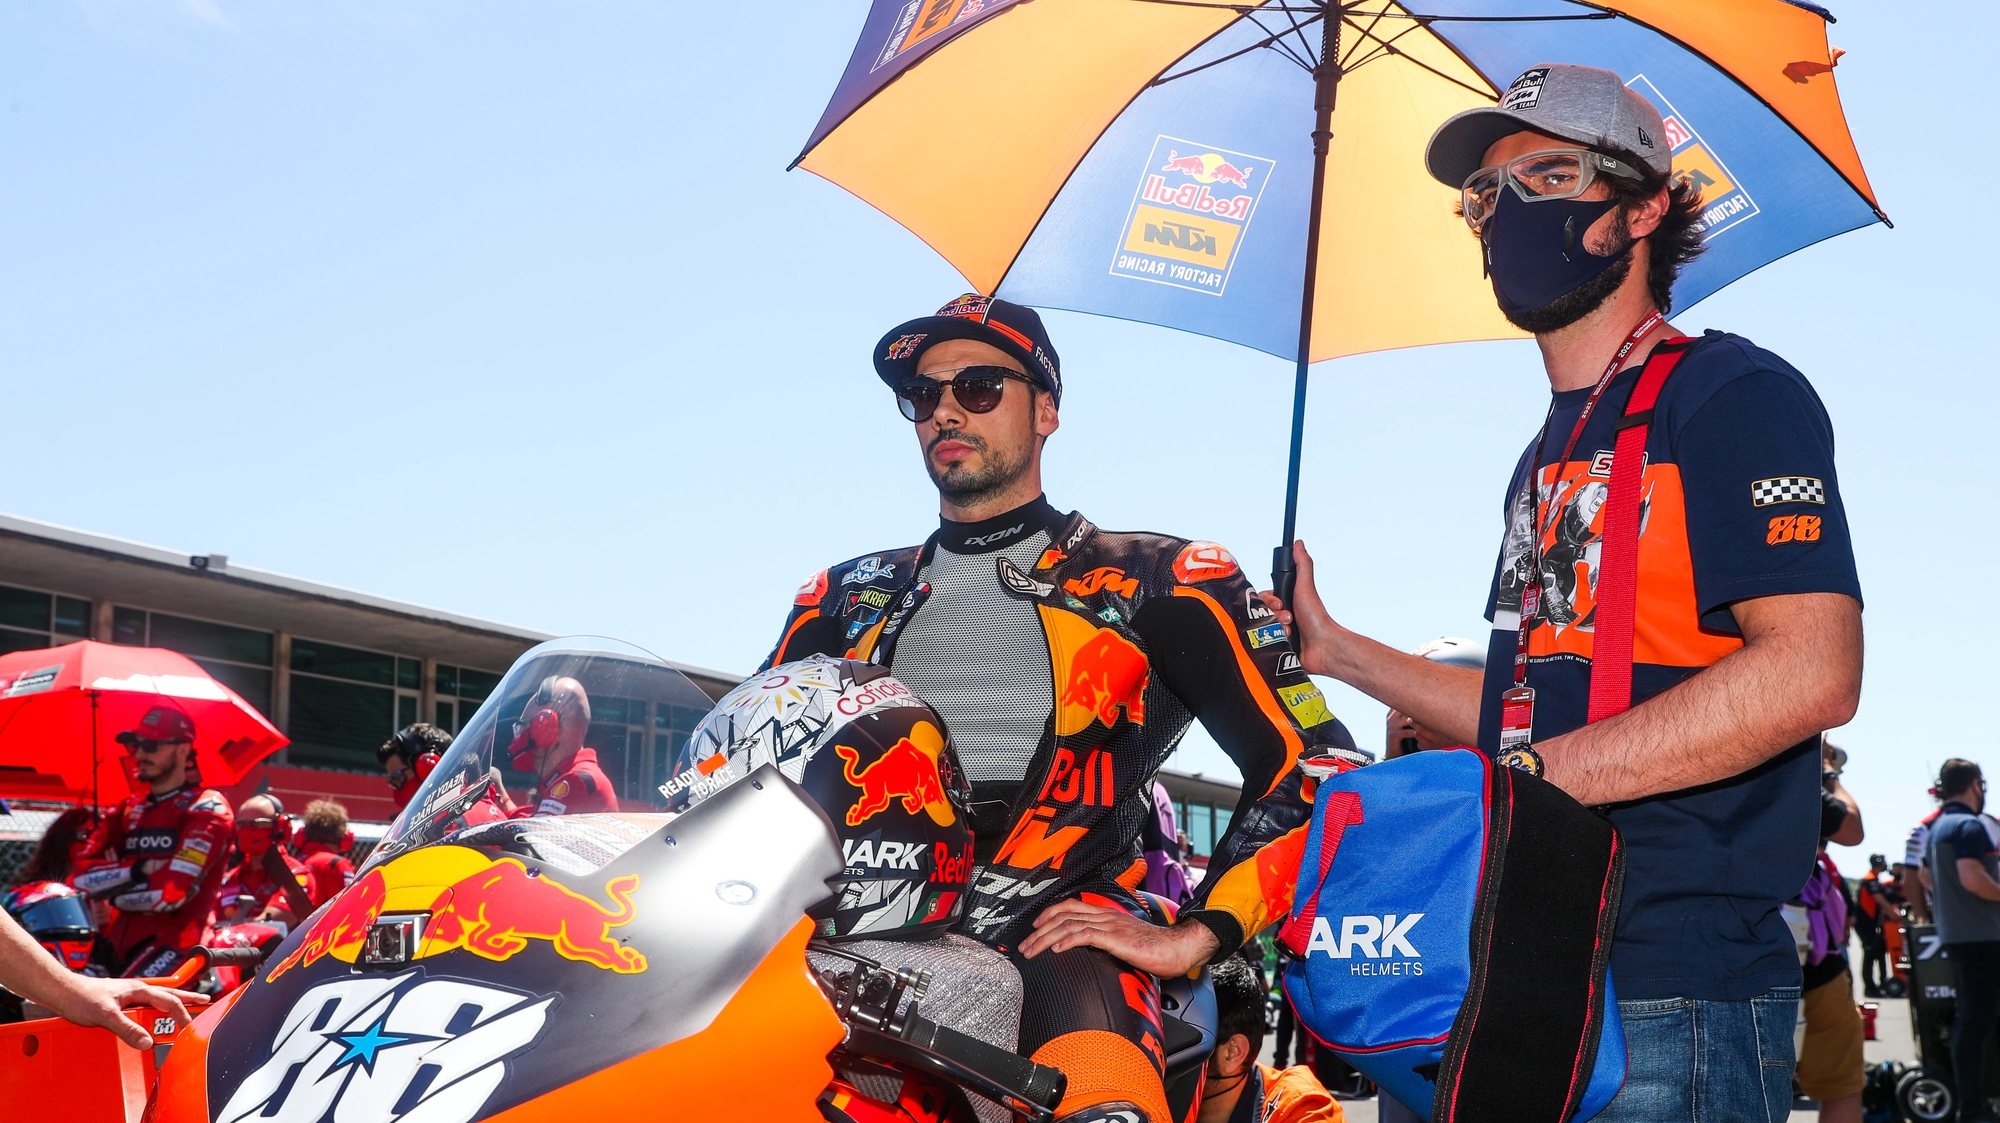 epa09143377 Portuguese rider of Red Bull KTM Factory Racing team, Miguel Oliveira on the grid prior to the MotoGP Motorcycling Grand Prix of Portugal at Algarve International race track in Portimao, southern Portugal, 18 April 2021.  EPA/JOSE SENA GOULAO